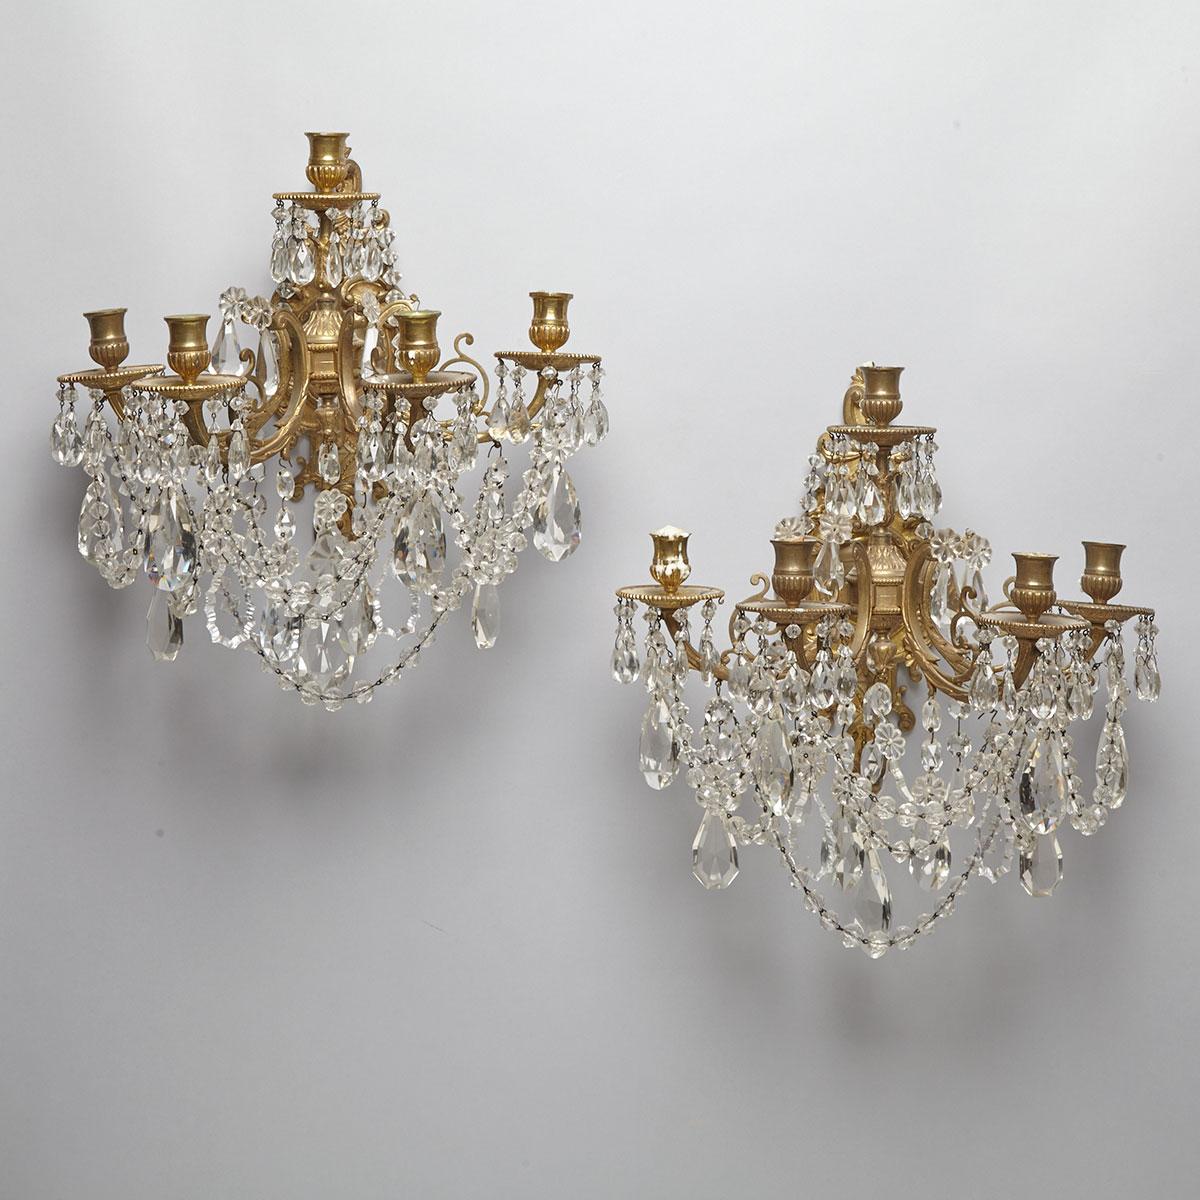 Pair of Cut Glass Mounted Brass Five-Candle Wall Sconces, early 20th centiury